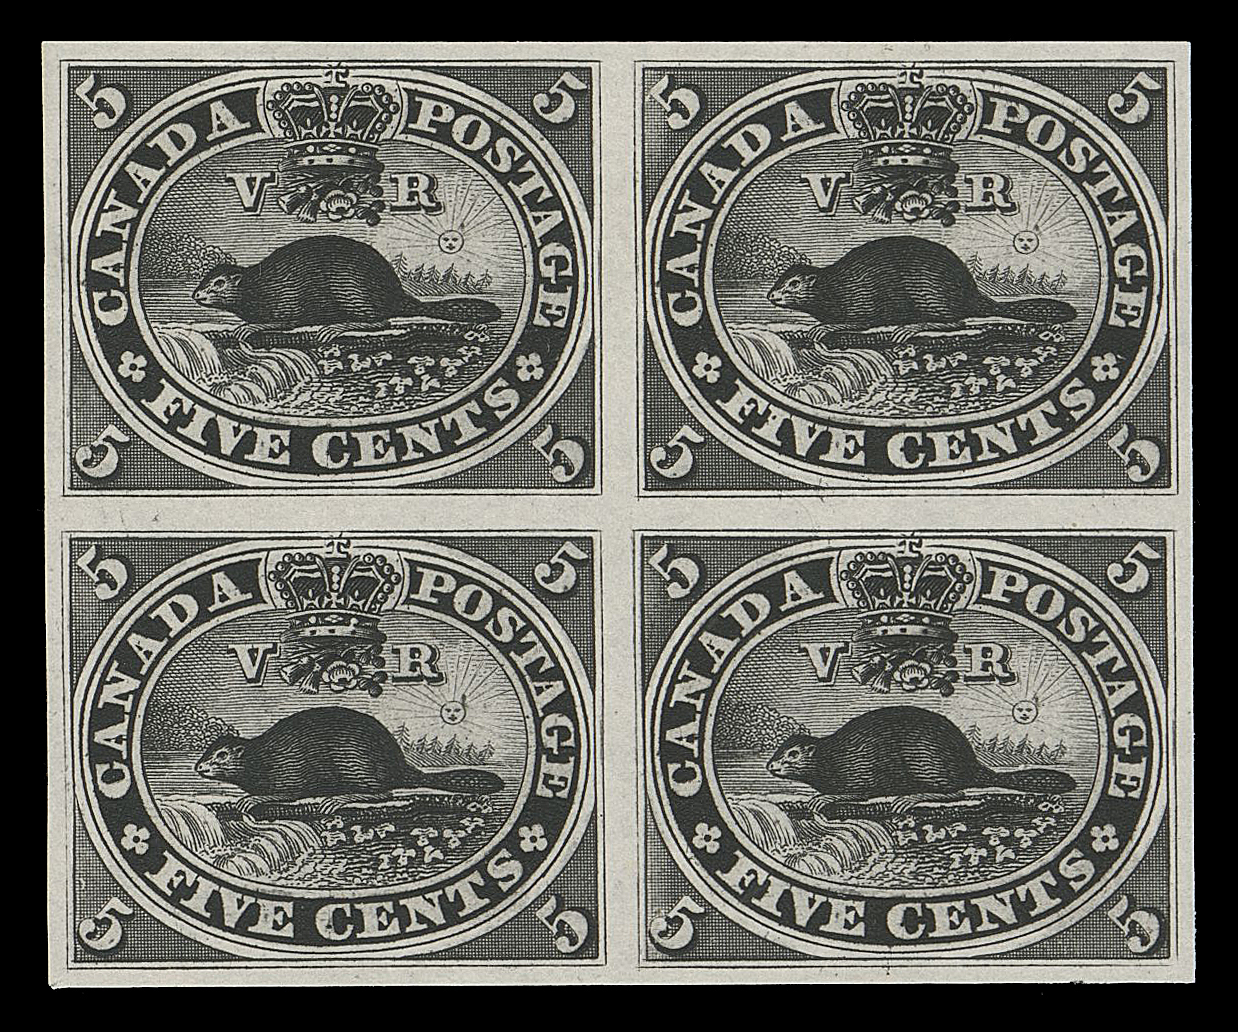 THREE PENCE AND FIVE CENTS  15TCvii,Superb trial colour plate proof block printed in black on india paper, displaying exceptionally strong colour and impression; no 5c proofs in black were present in th 1990 ABNC sale. Very scarce and especially desirable in such premium condition, XF